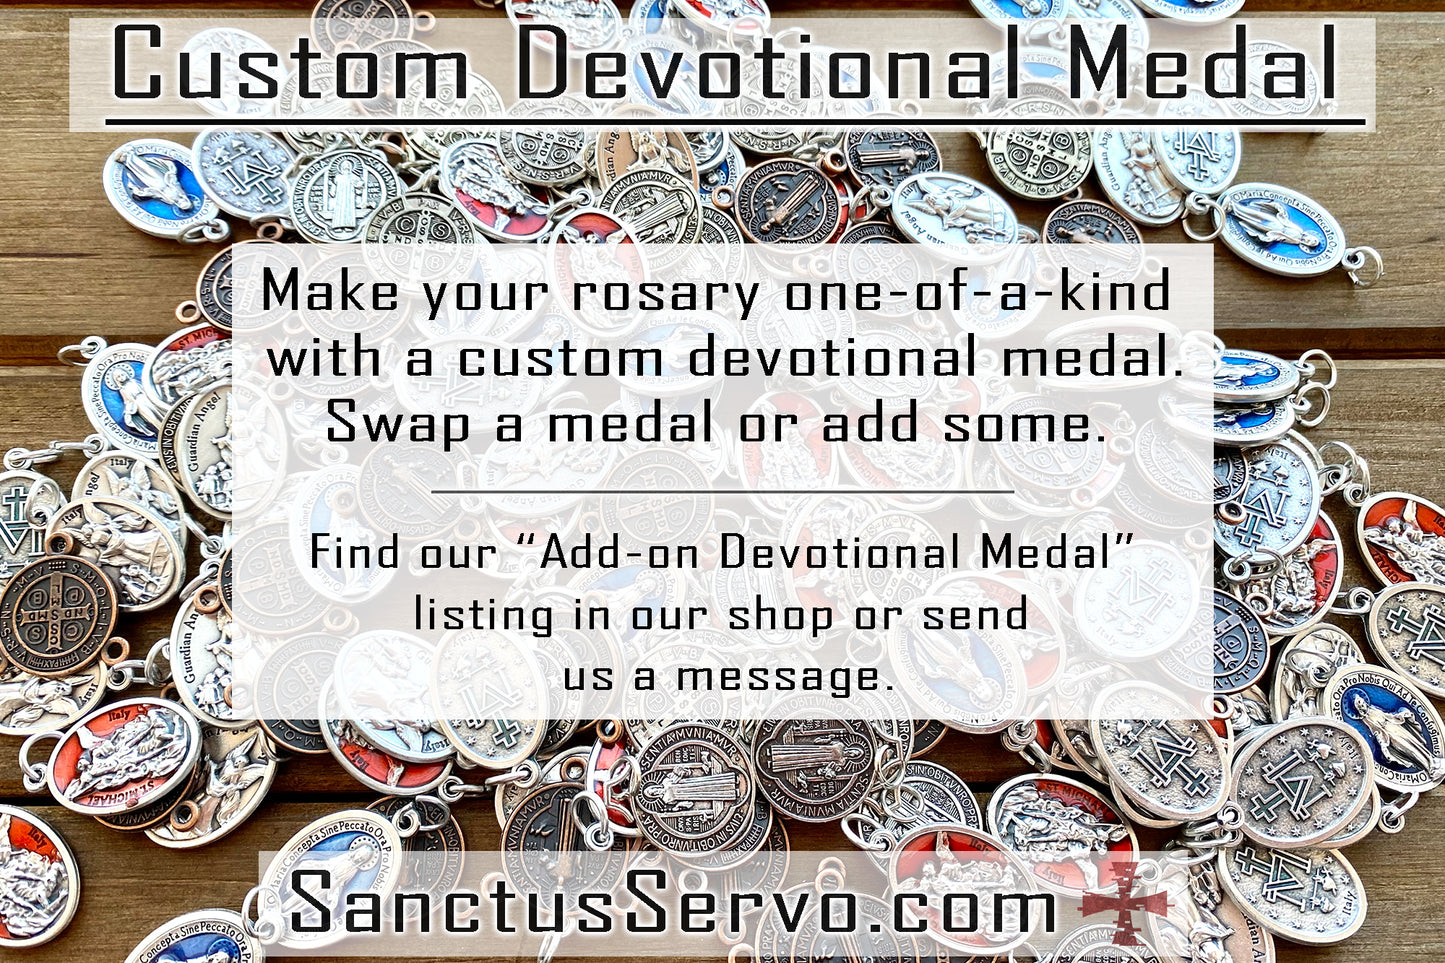 Customize your Catholic rosary with an add-on devotional medal featuring over 60 saintly options, deepening your faith and devotion while adding a personal touch. Our premium accessories make the perfect gift for any occasion! 